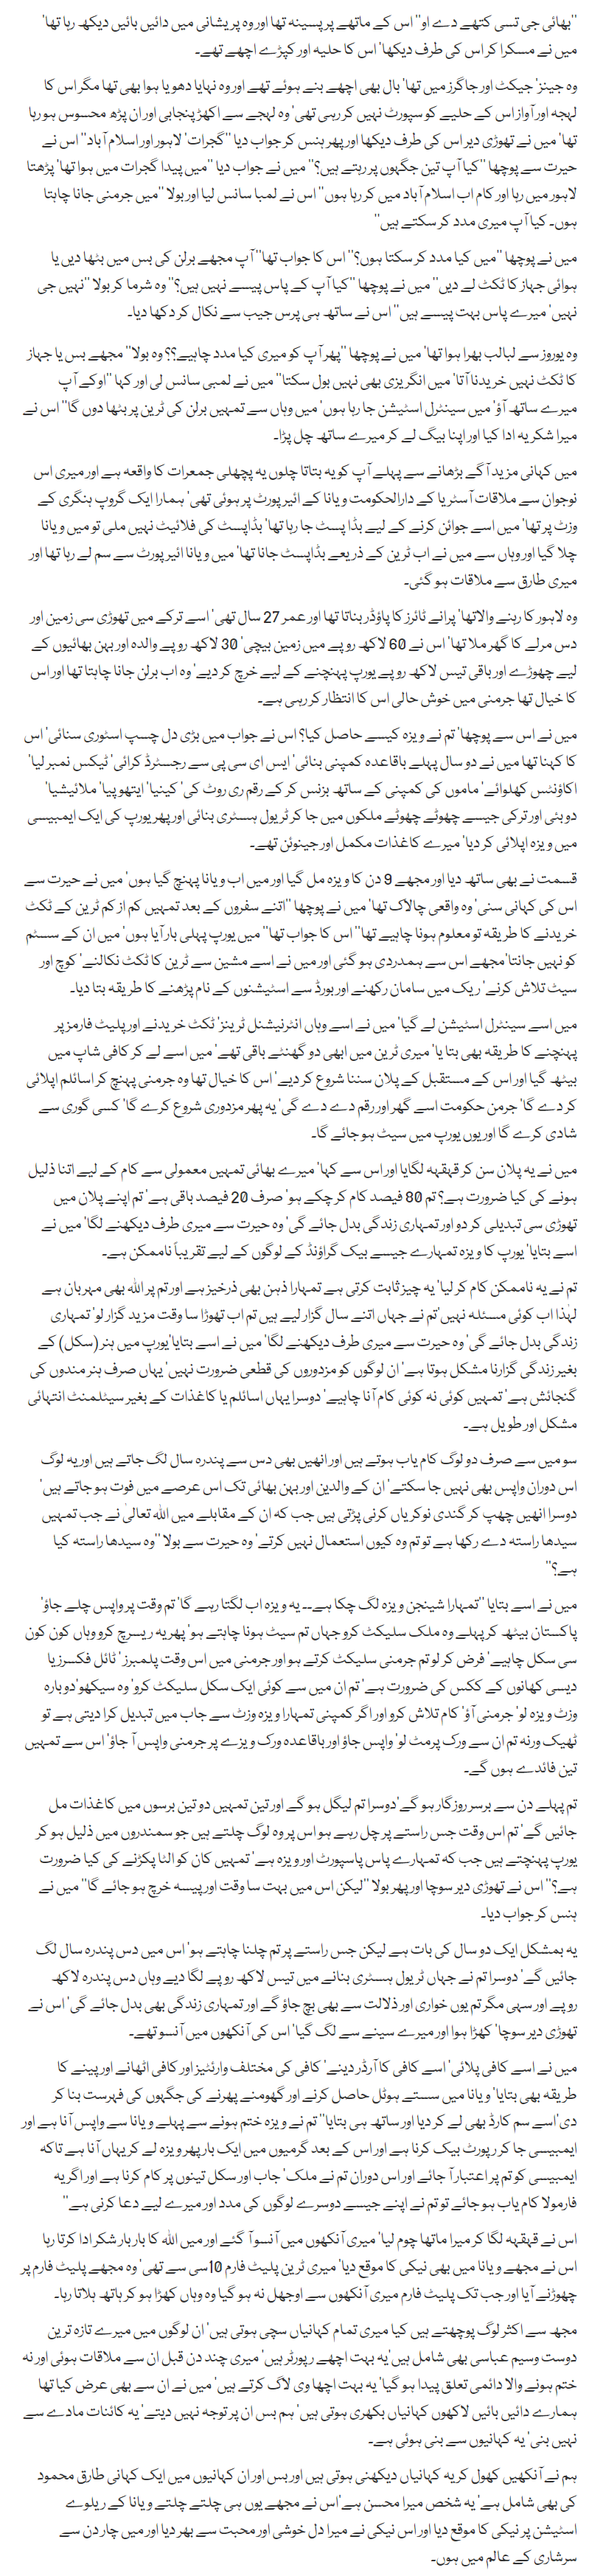 Javed Chaudhry Urdu Column Chaltay Chaltay About Tariq Mehmood Success Story